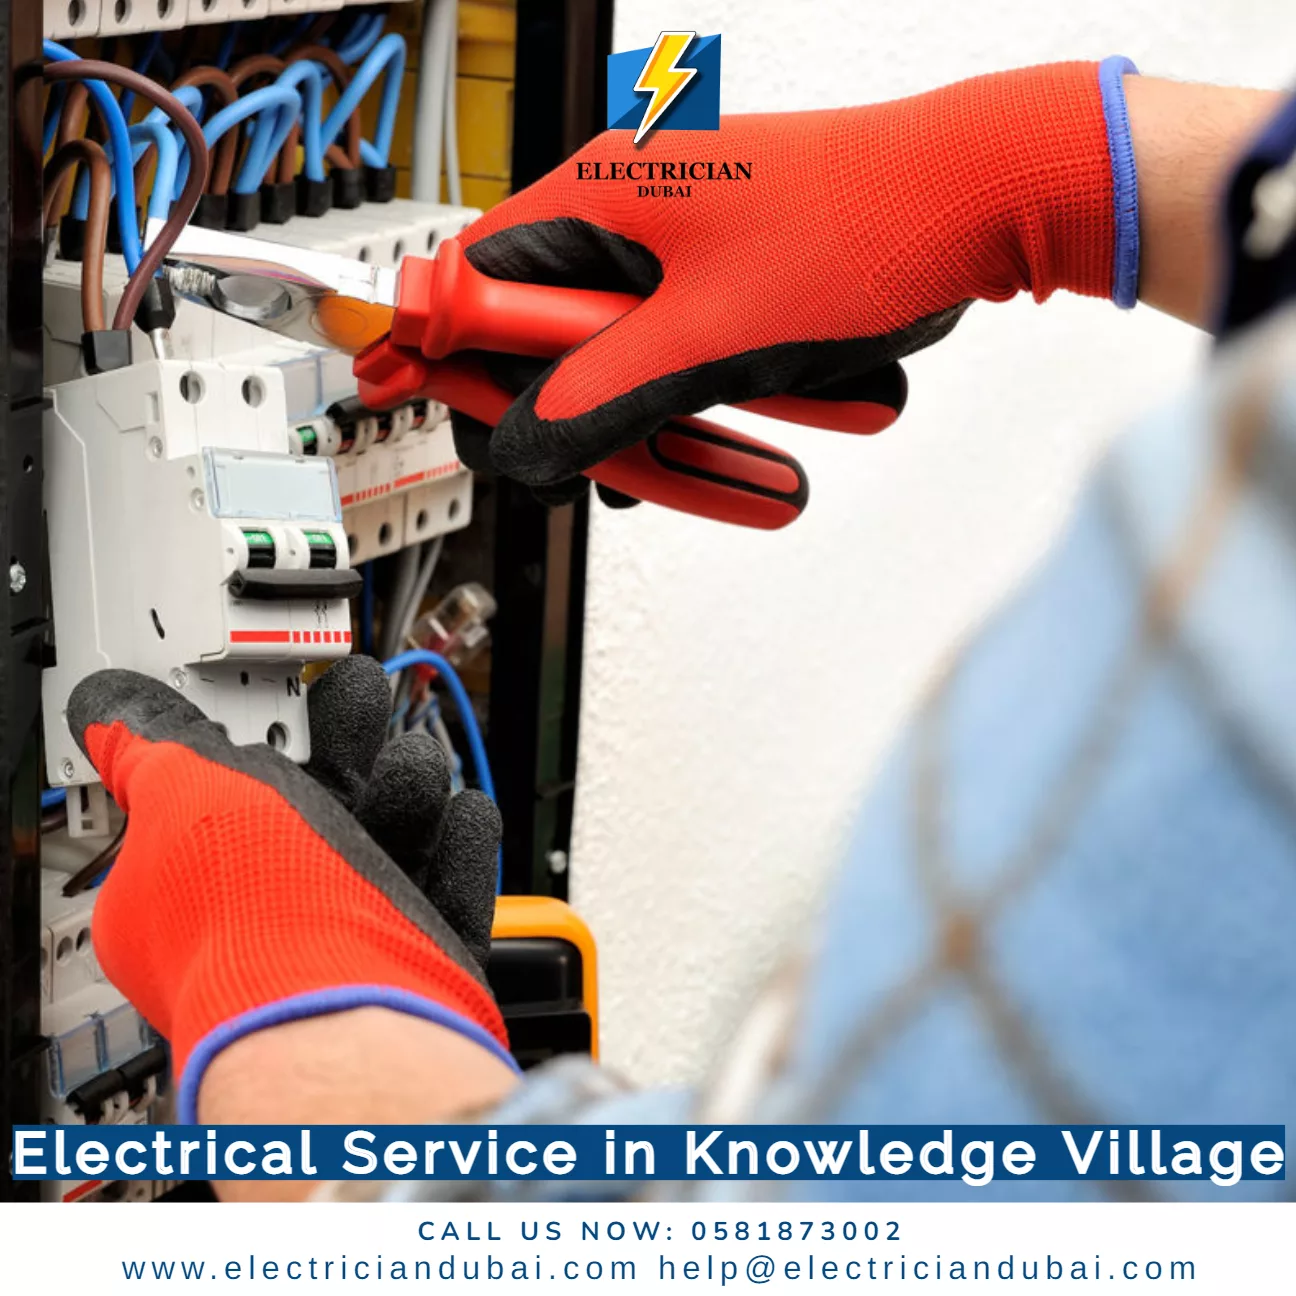 Electrical Service in Knowledge Village